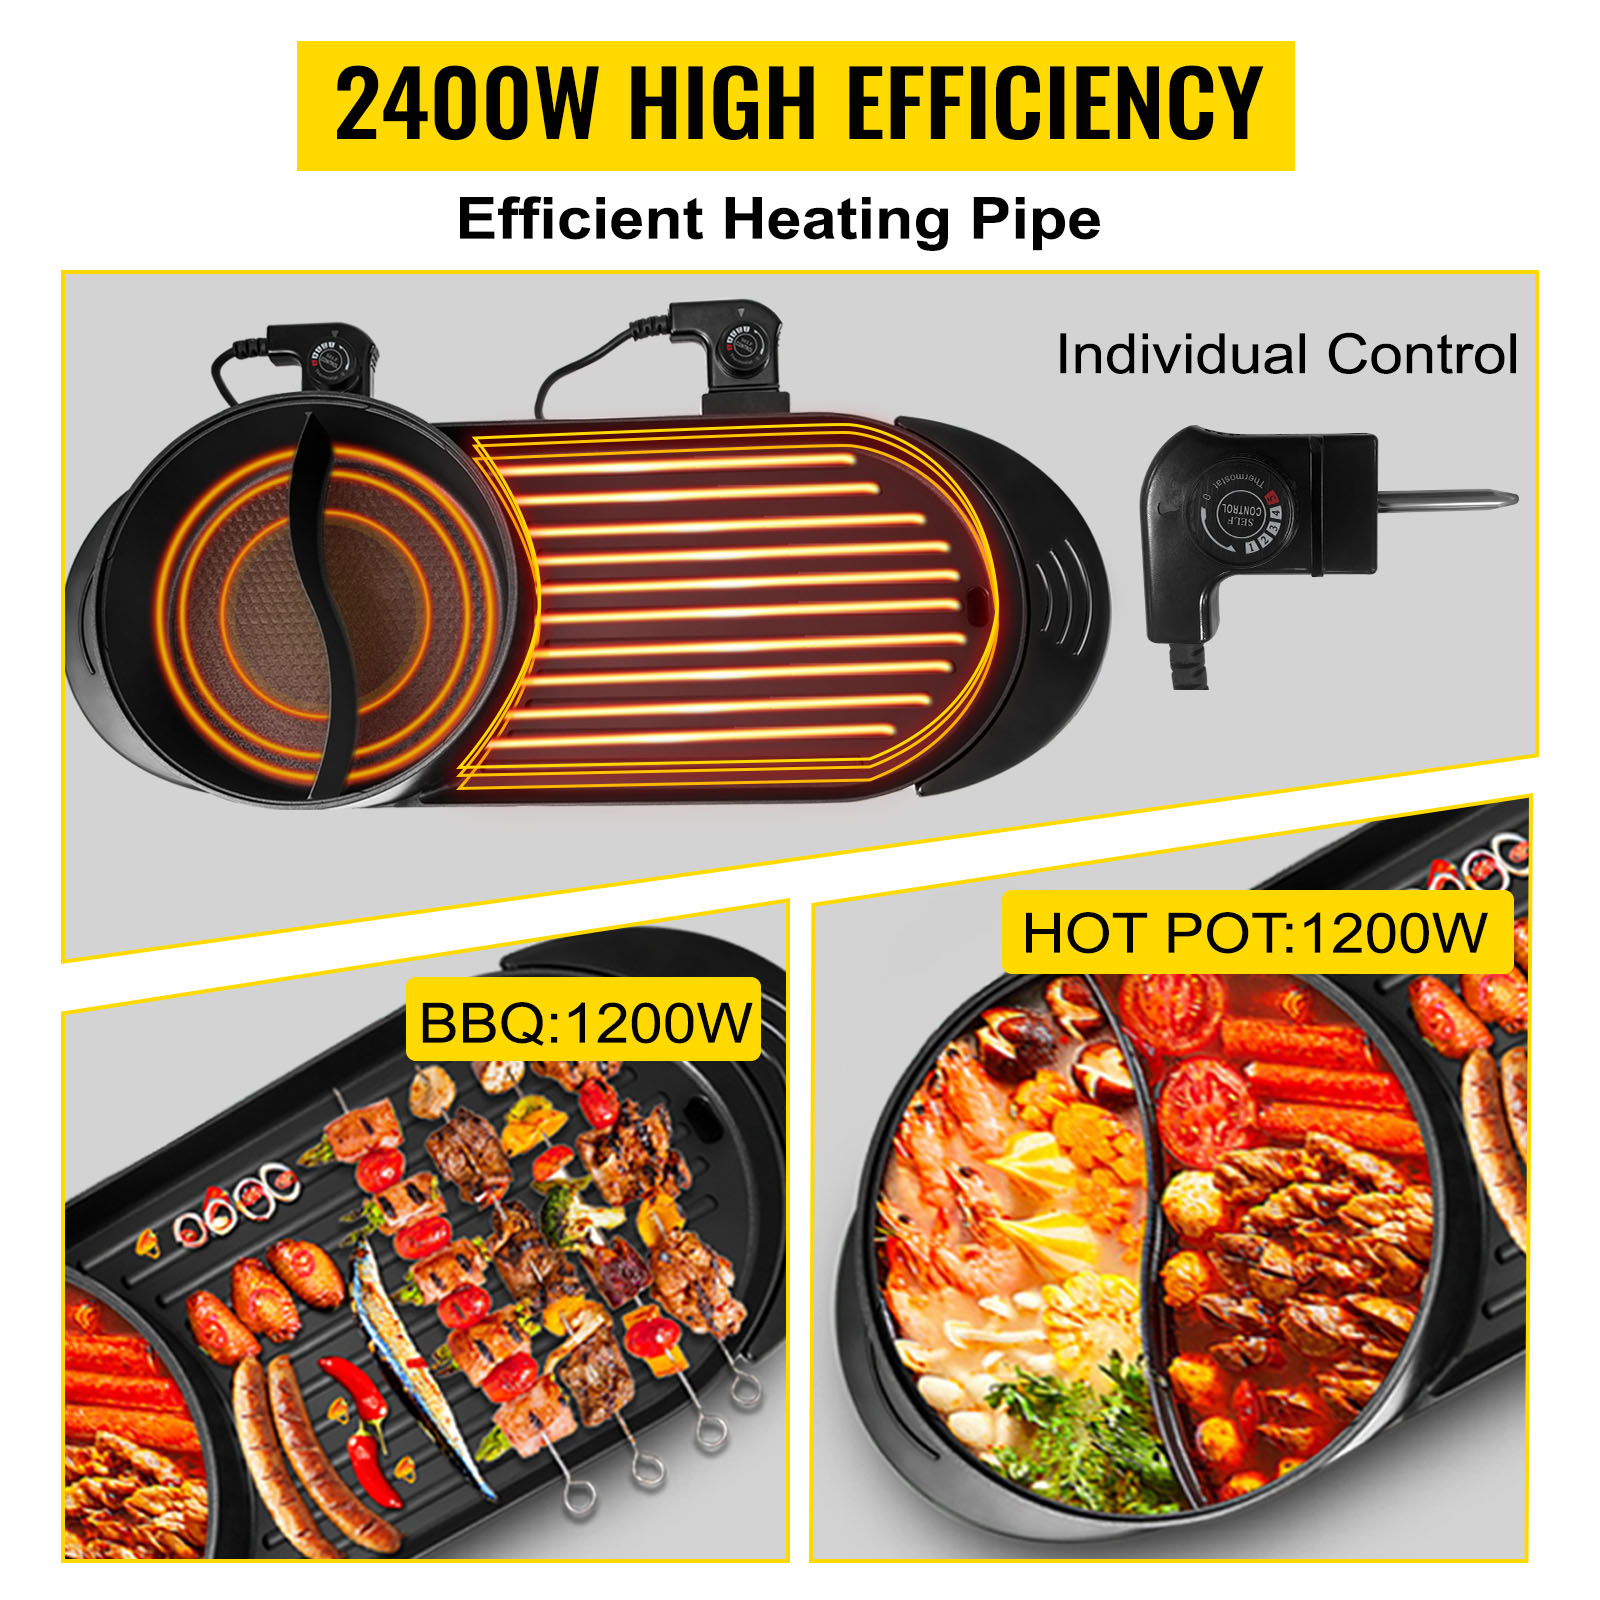 VEVOR 2 in 1 Electric Grill and Hot Pot BBQ Pan Grill and Hot Pot Smokeless Hot  Pot Grill with Dual Temp Control FTSJ2200W110VXOZEV1 - The Home Depot